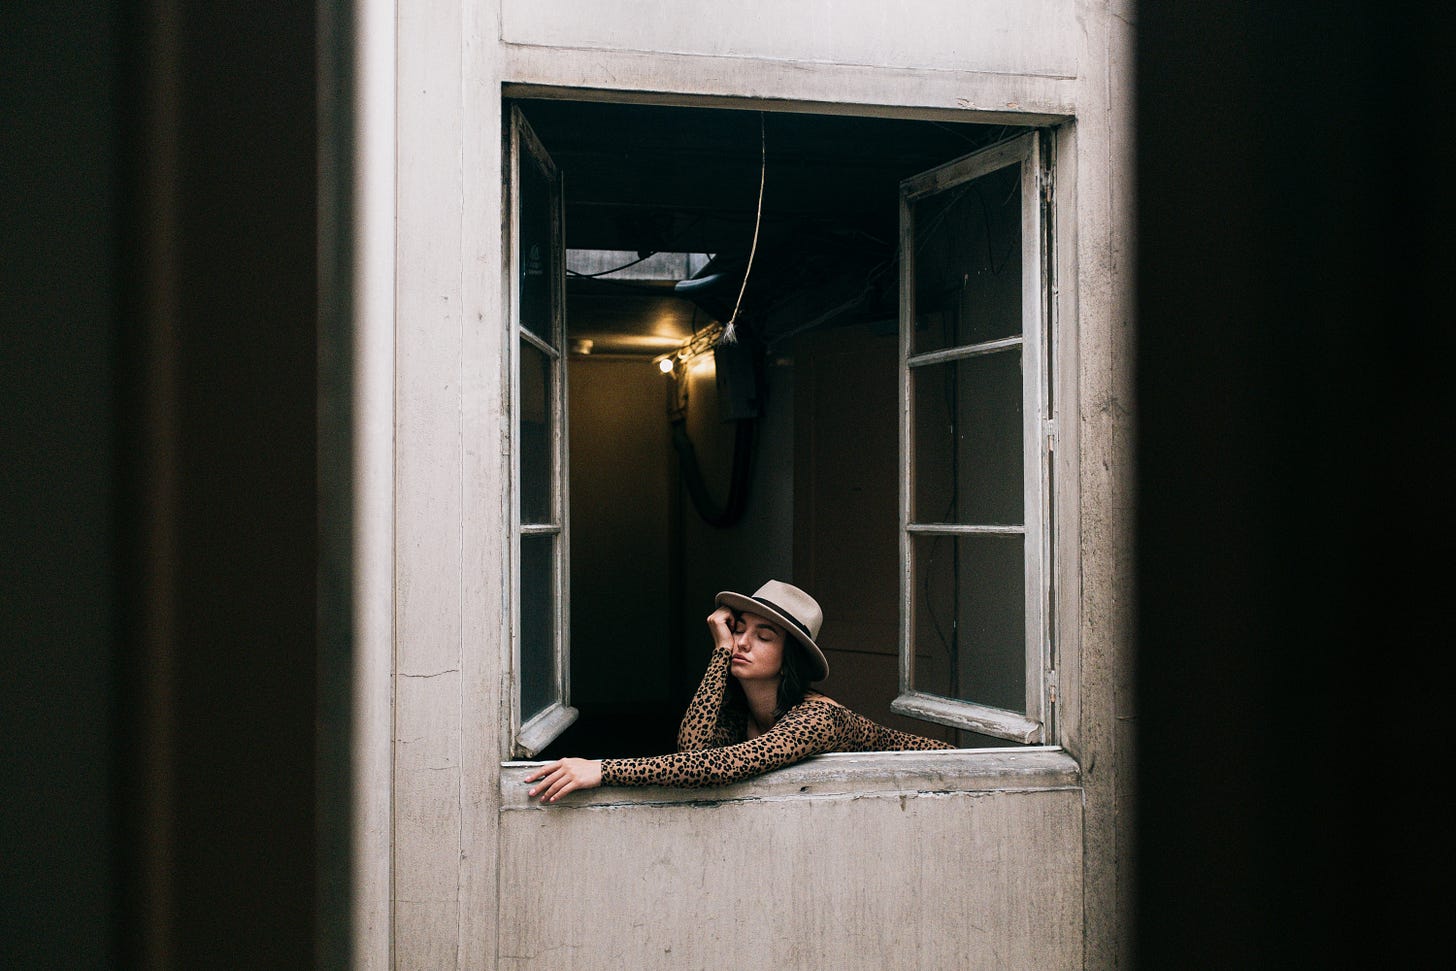 bored young woman in window